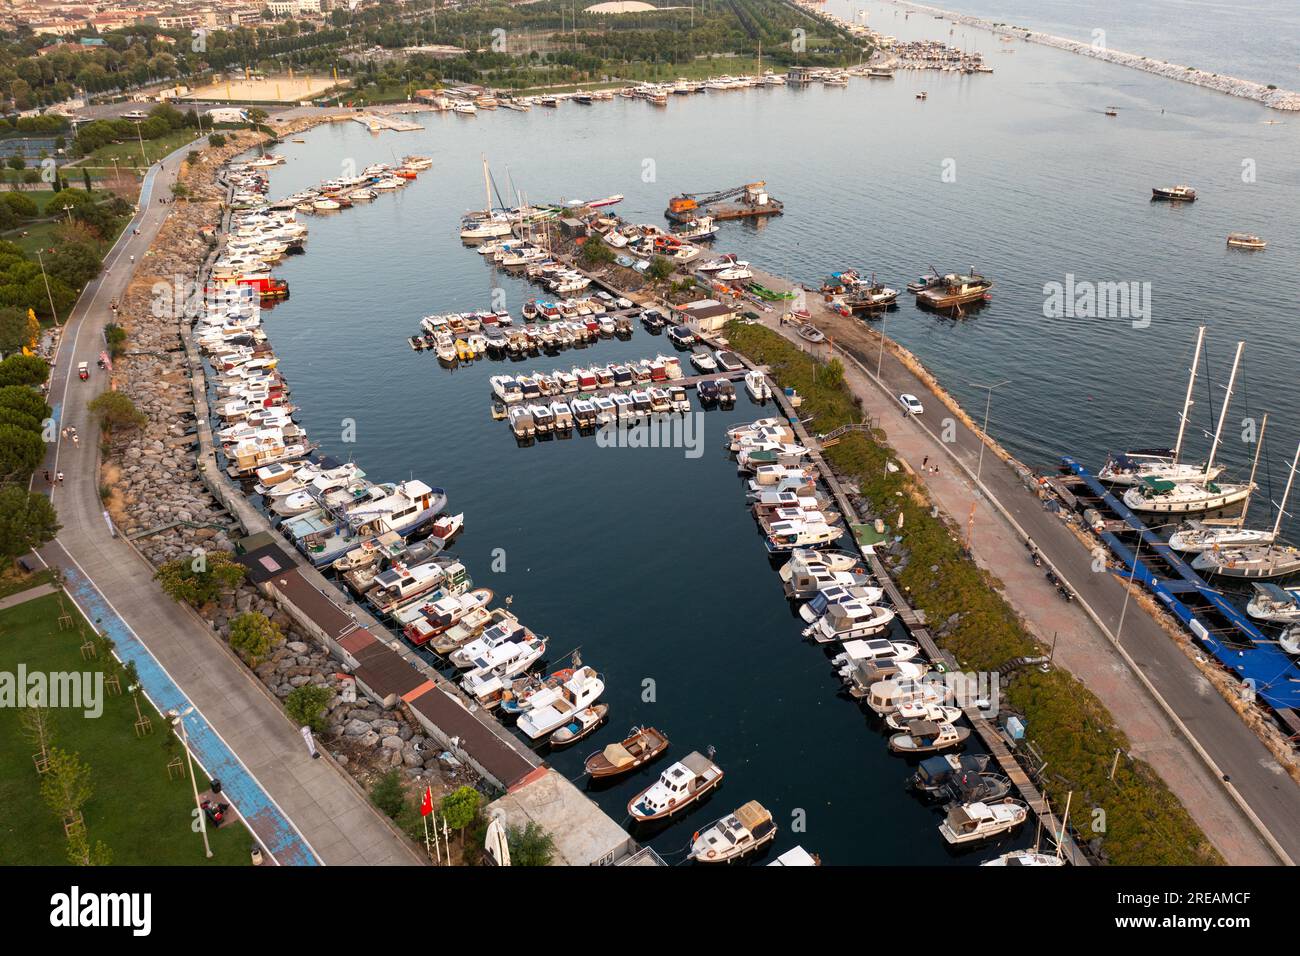 Drone view Maltepe Sahil at sunset. Aerial view of over park and harbor in Maltepe district on the Marmara Sea coast of the Asian side of Istanbul. Stock Photo